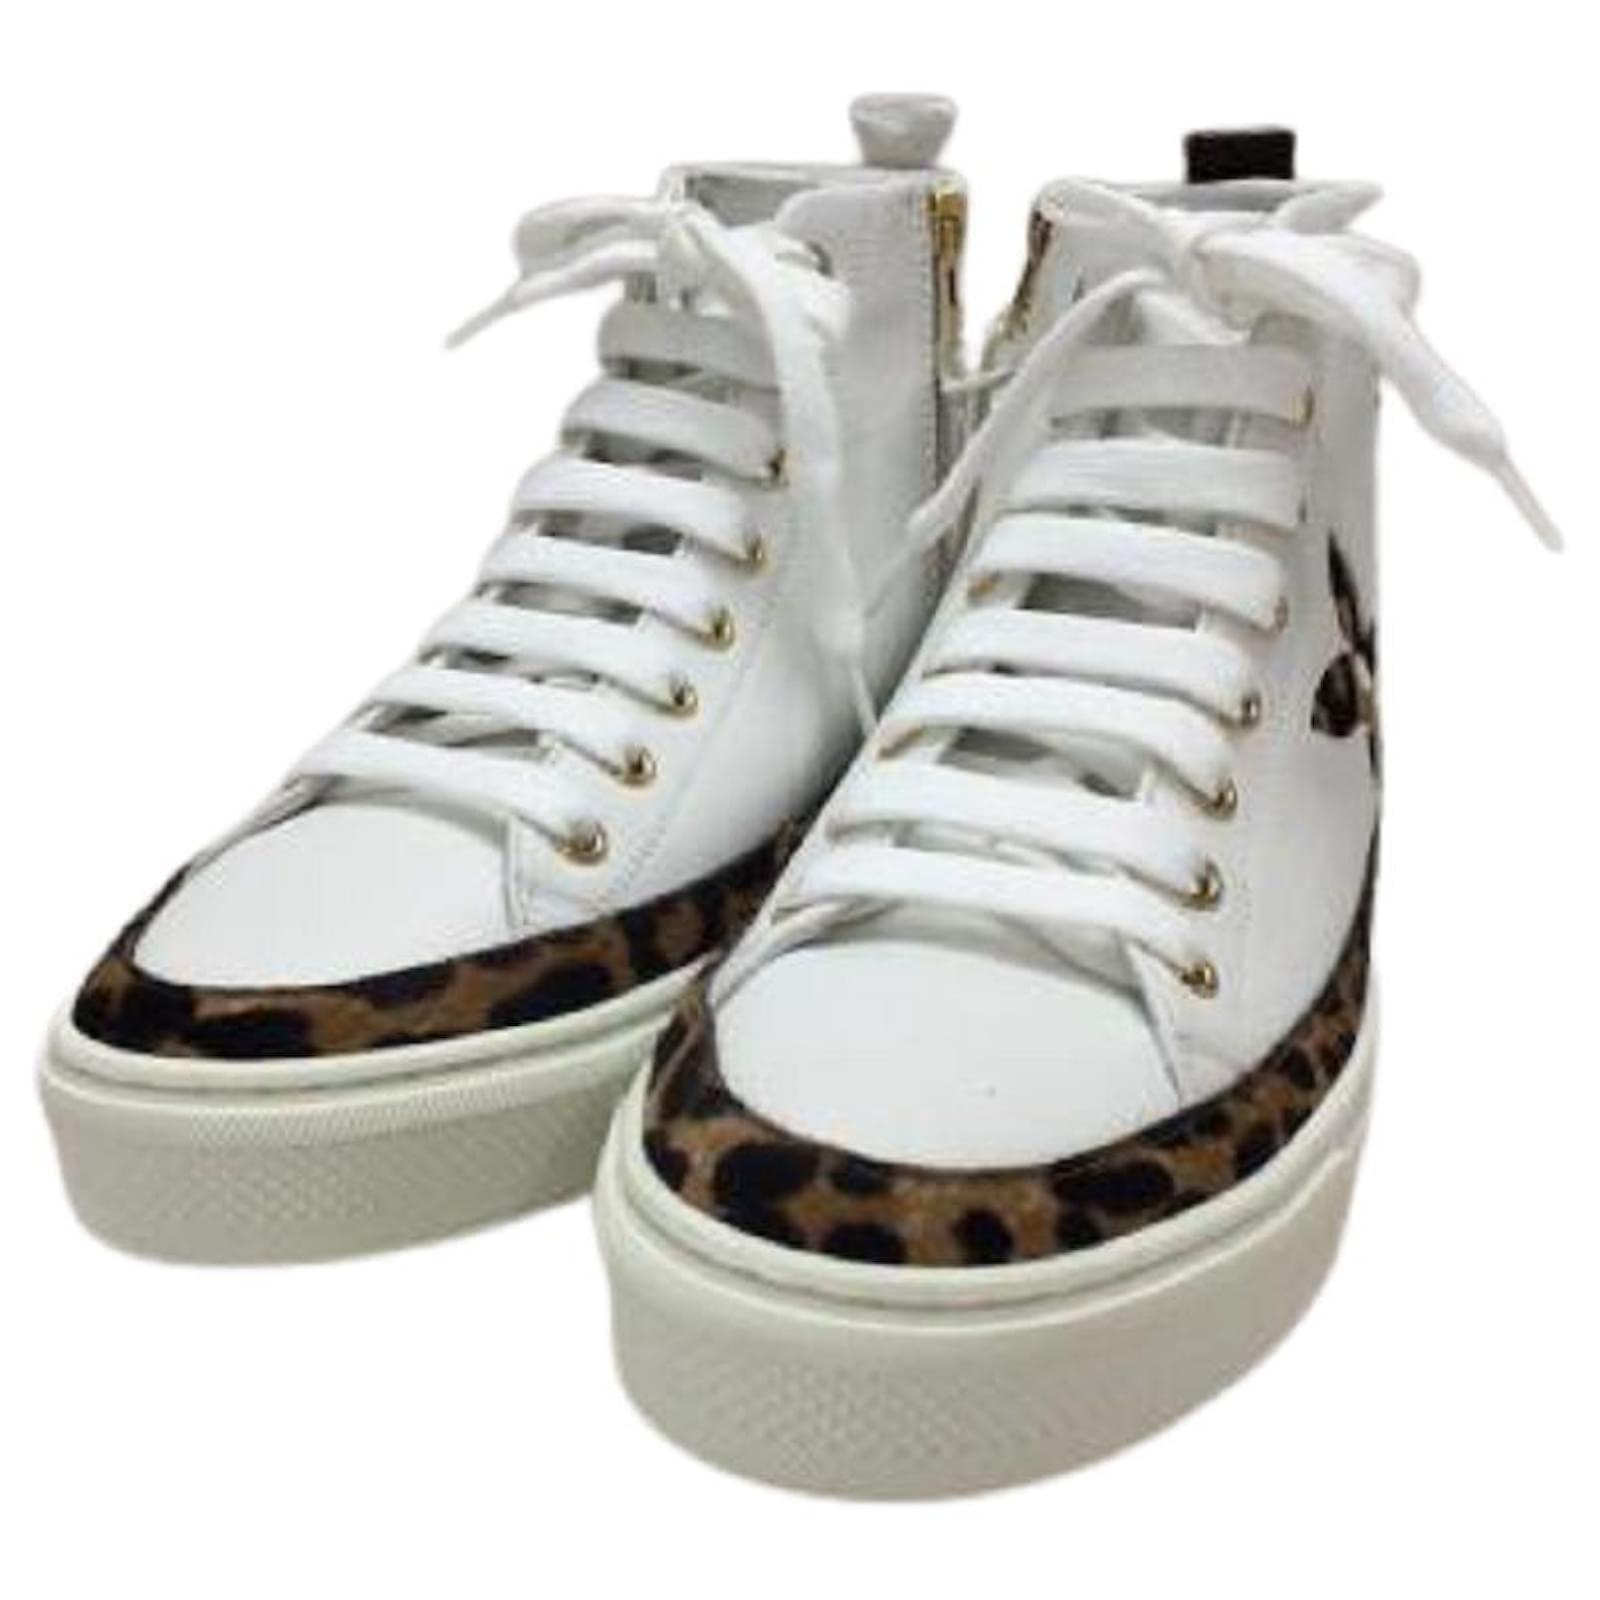 Used] LOUIS VUITTON High-top sneakers / 36 / WHT / leather